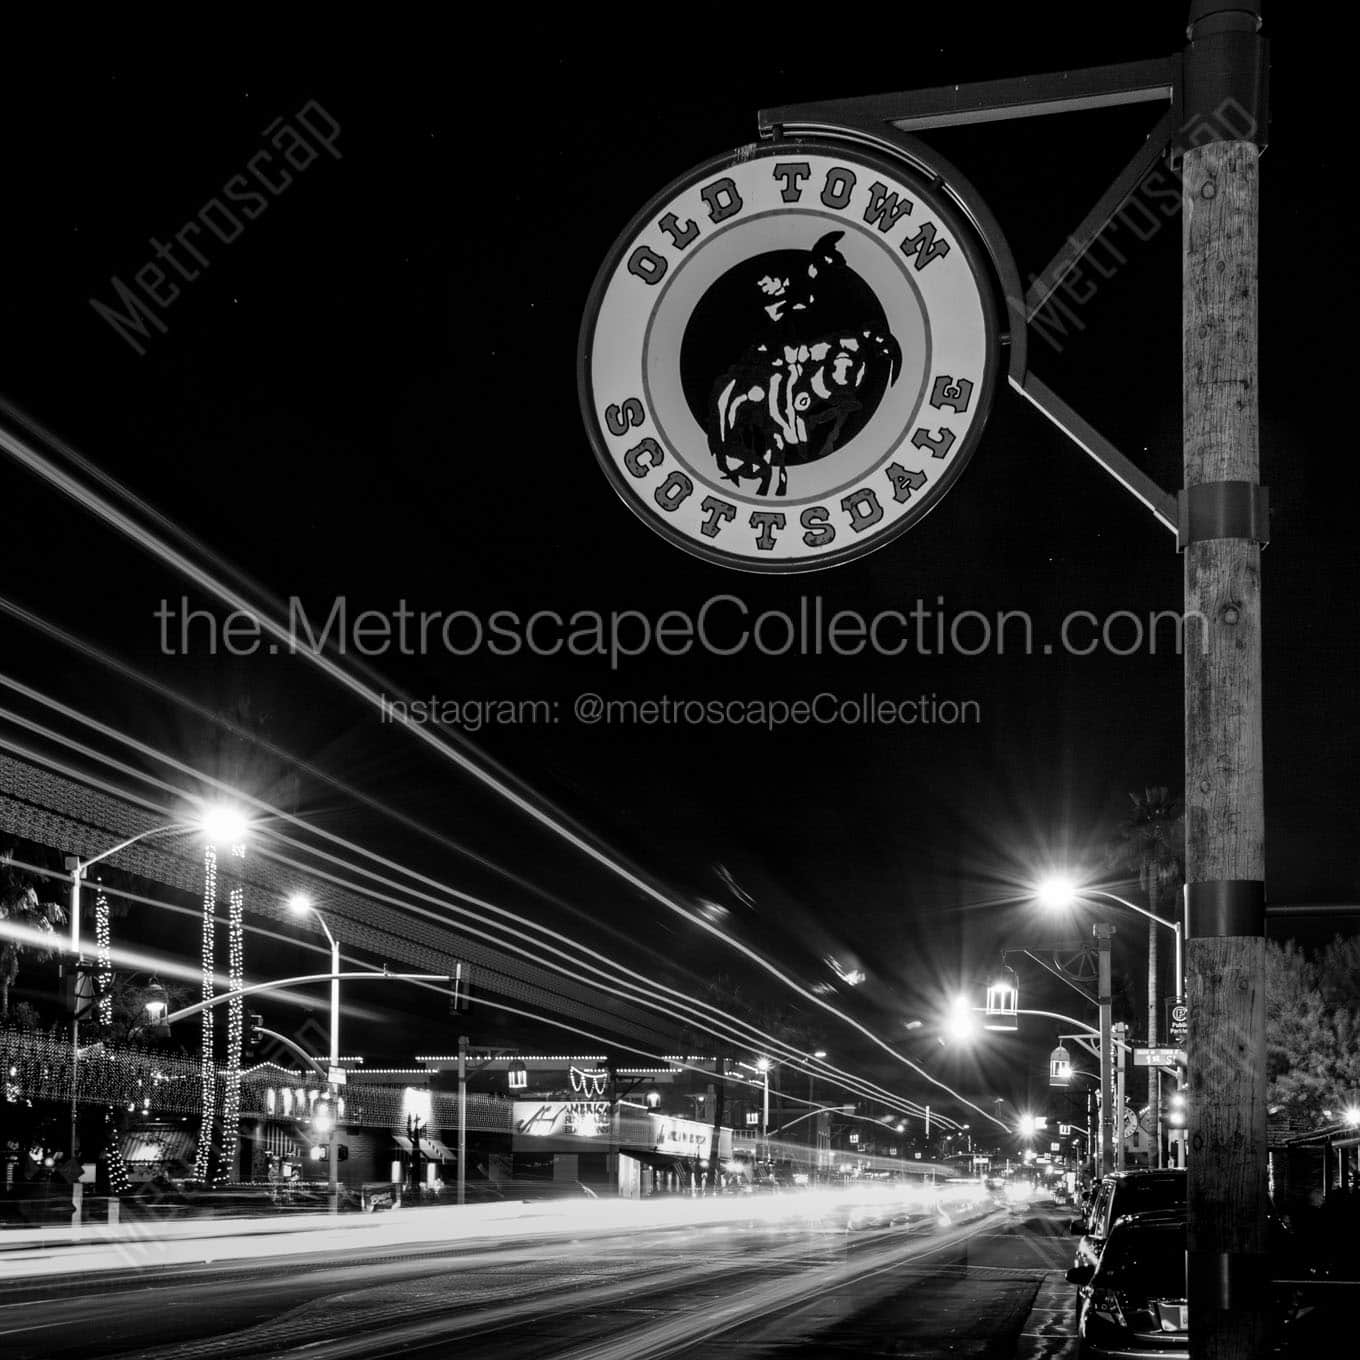 old town scottsdale at night Black & White Office Art